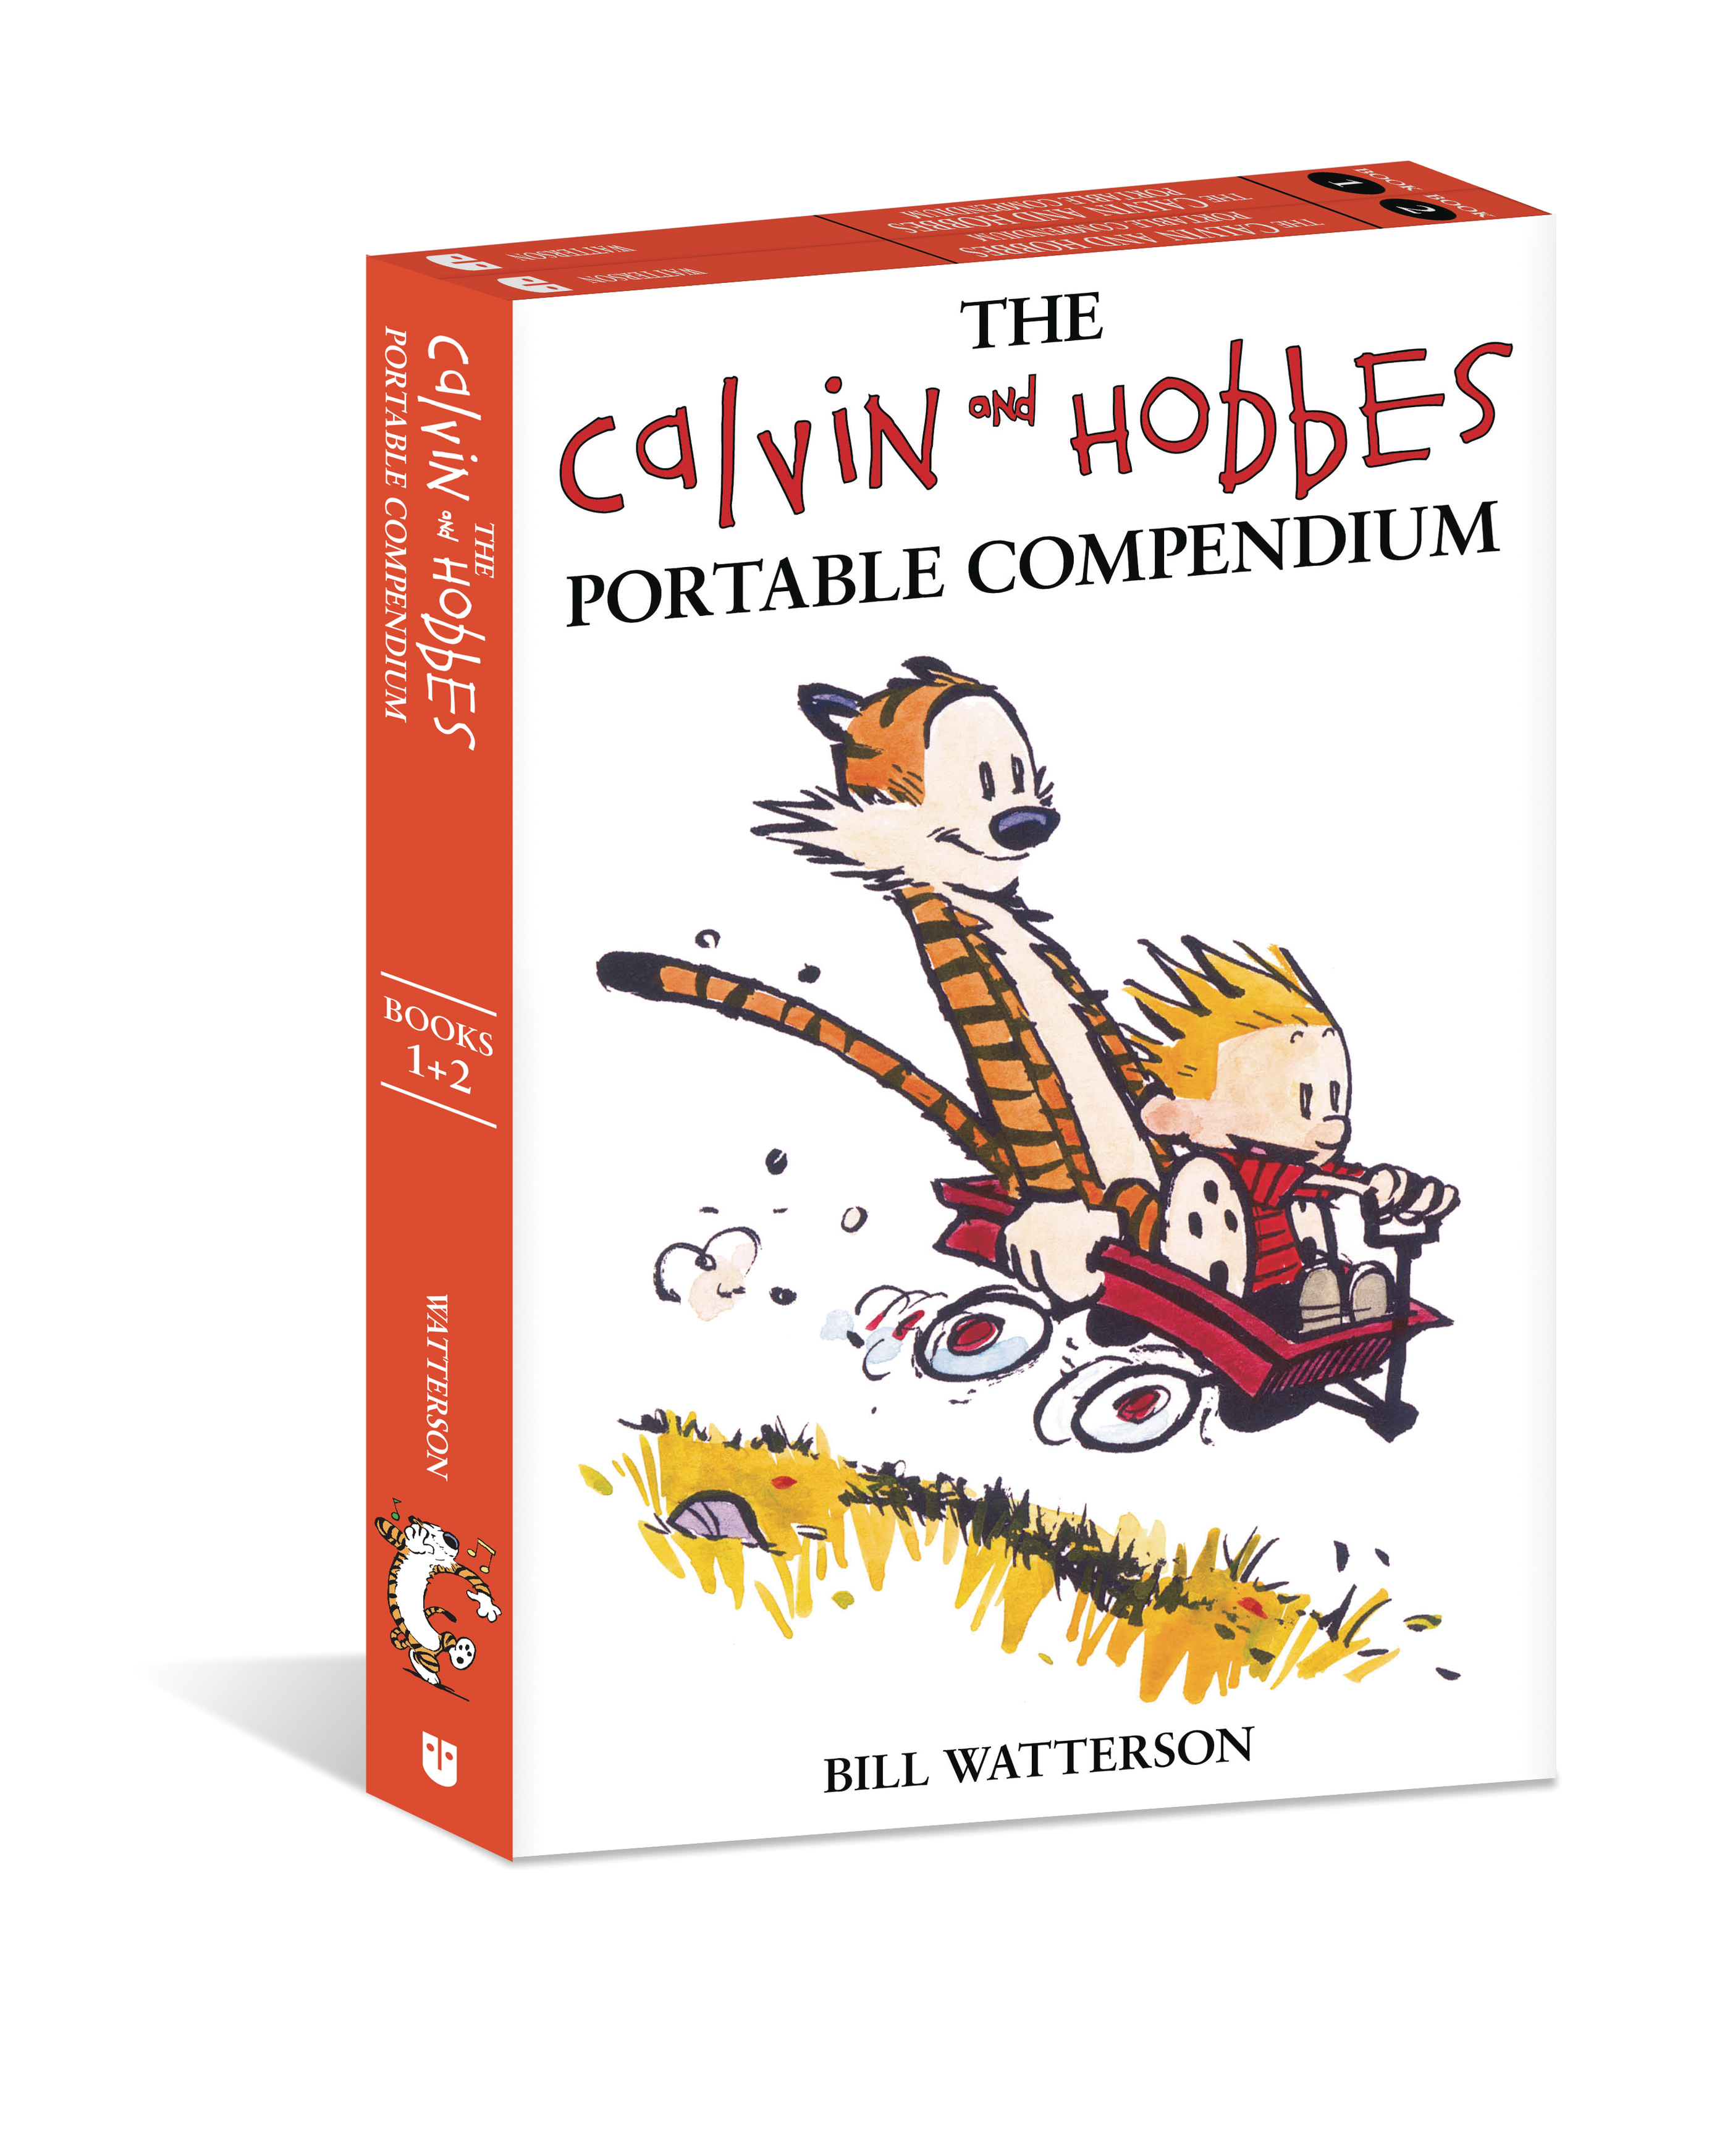 Calvin and Hobbes Portable Compendium Soft Cover Volume 1